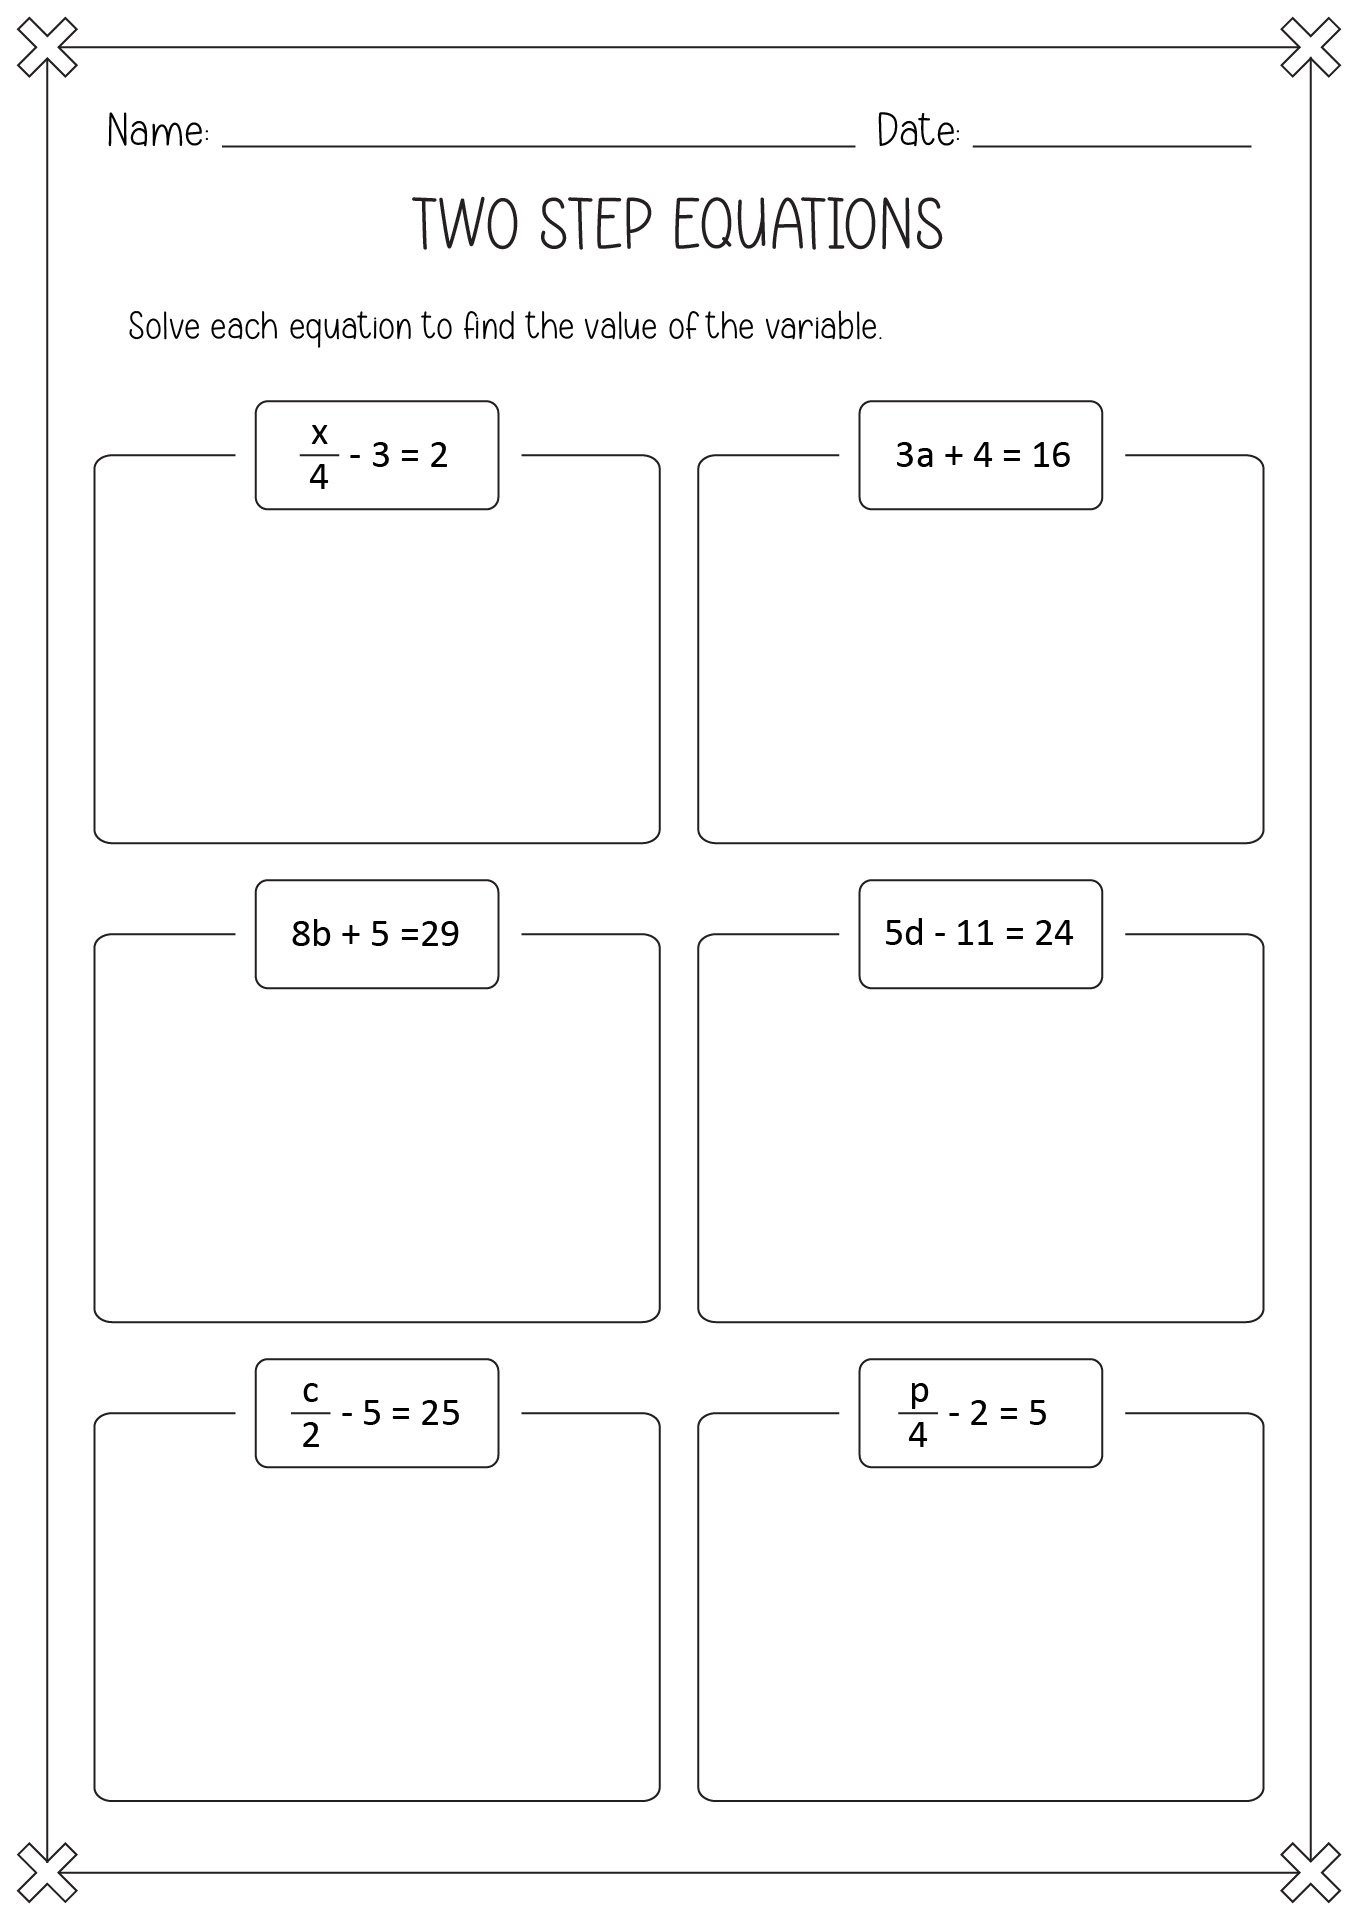 Solving Two-Step Equations Worksheet